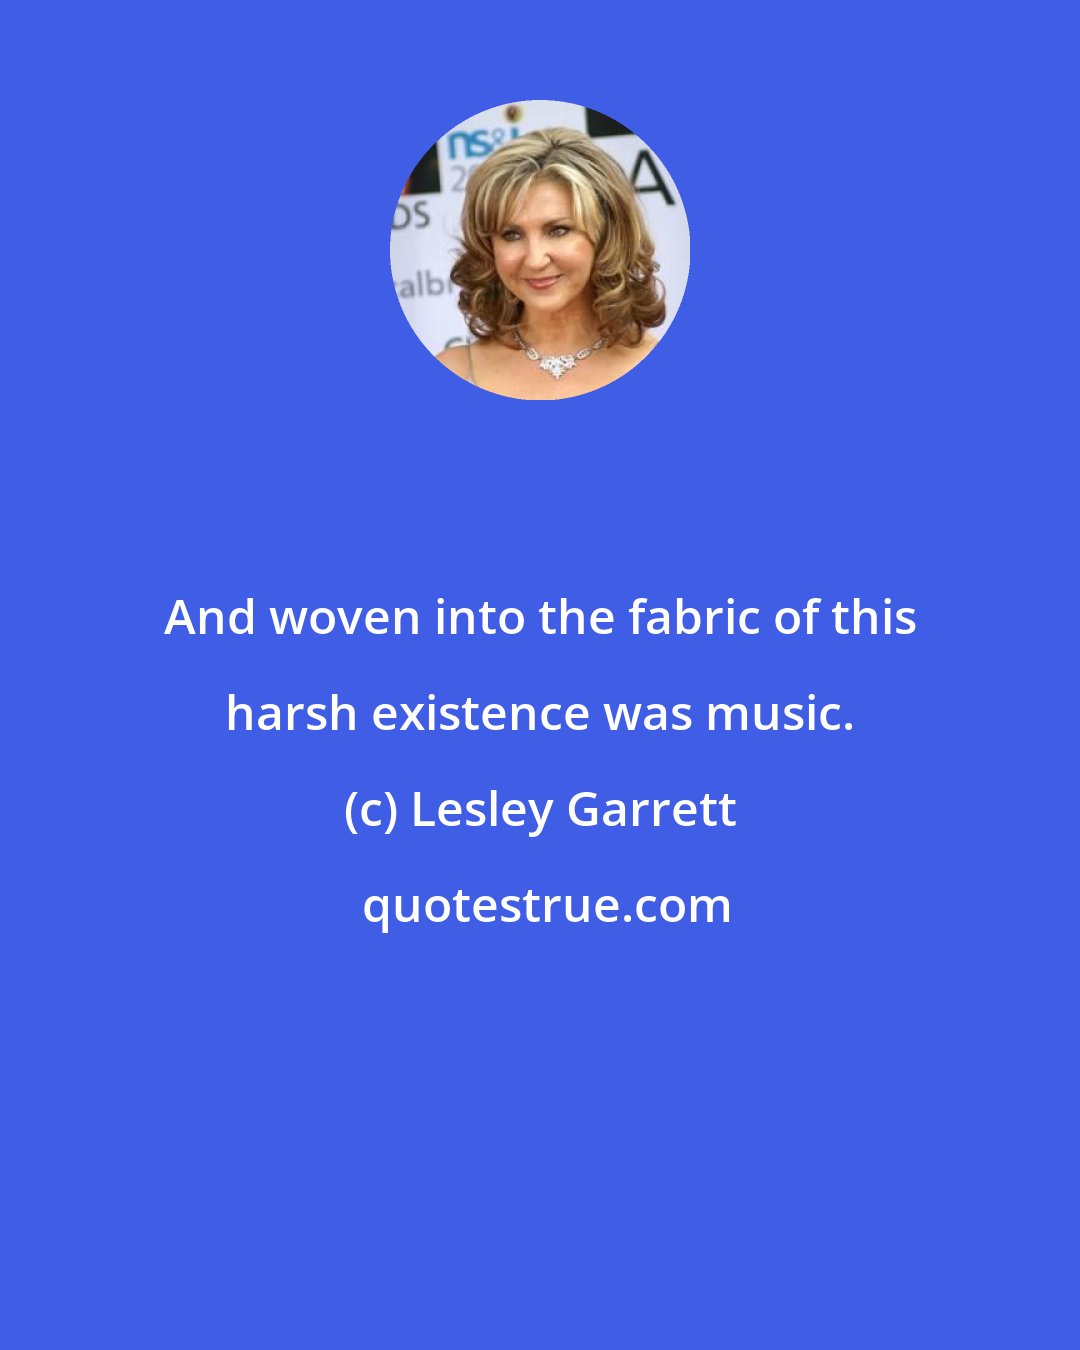 Lesley Garrett: And woven into the fabric of this harsh existence was music.